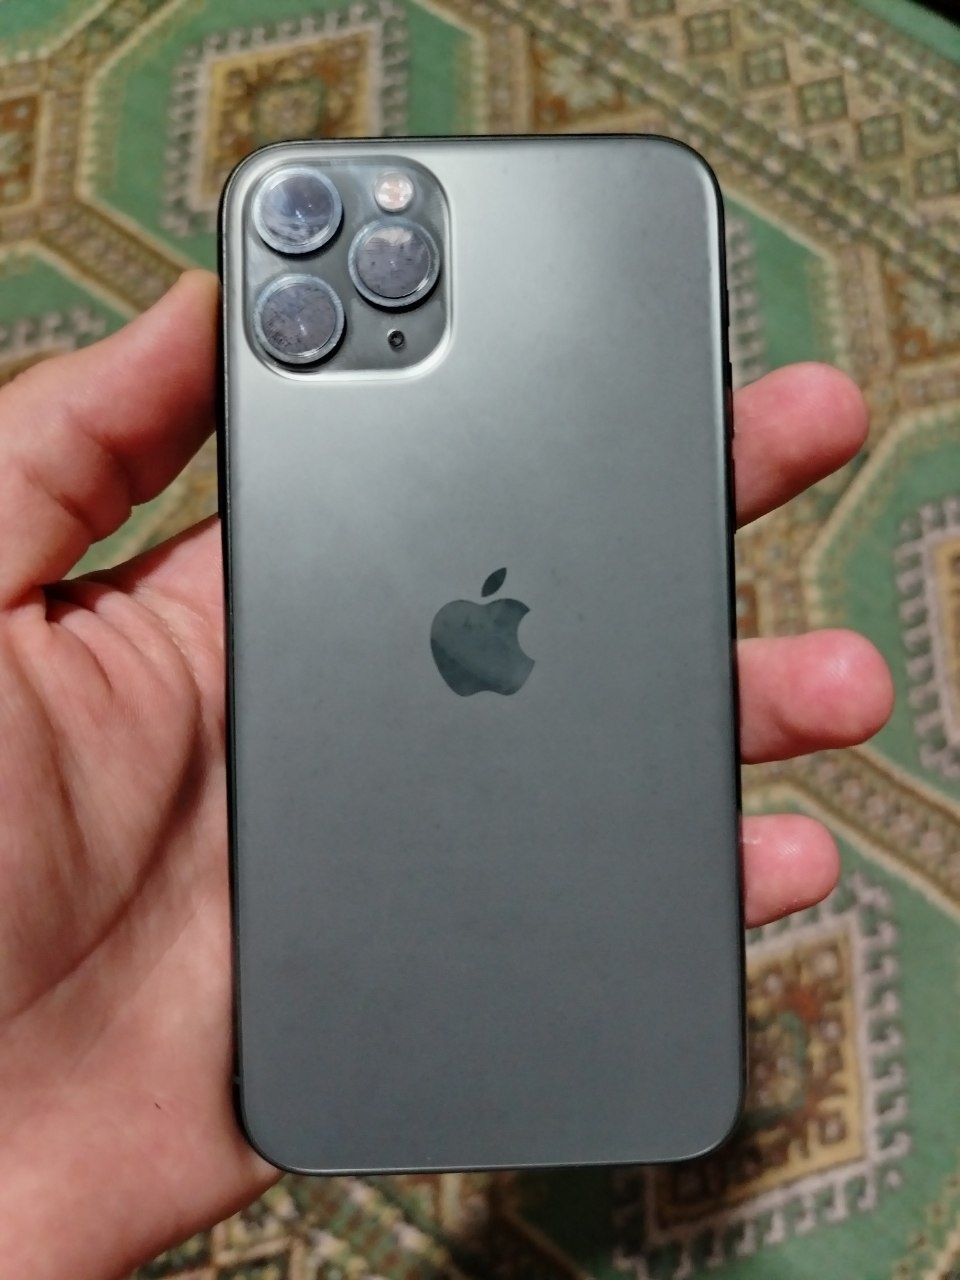 iphone 11 pro ideal